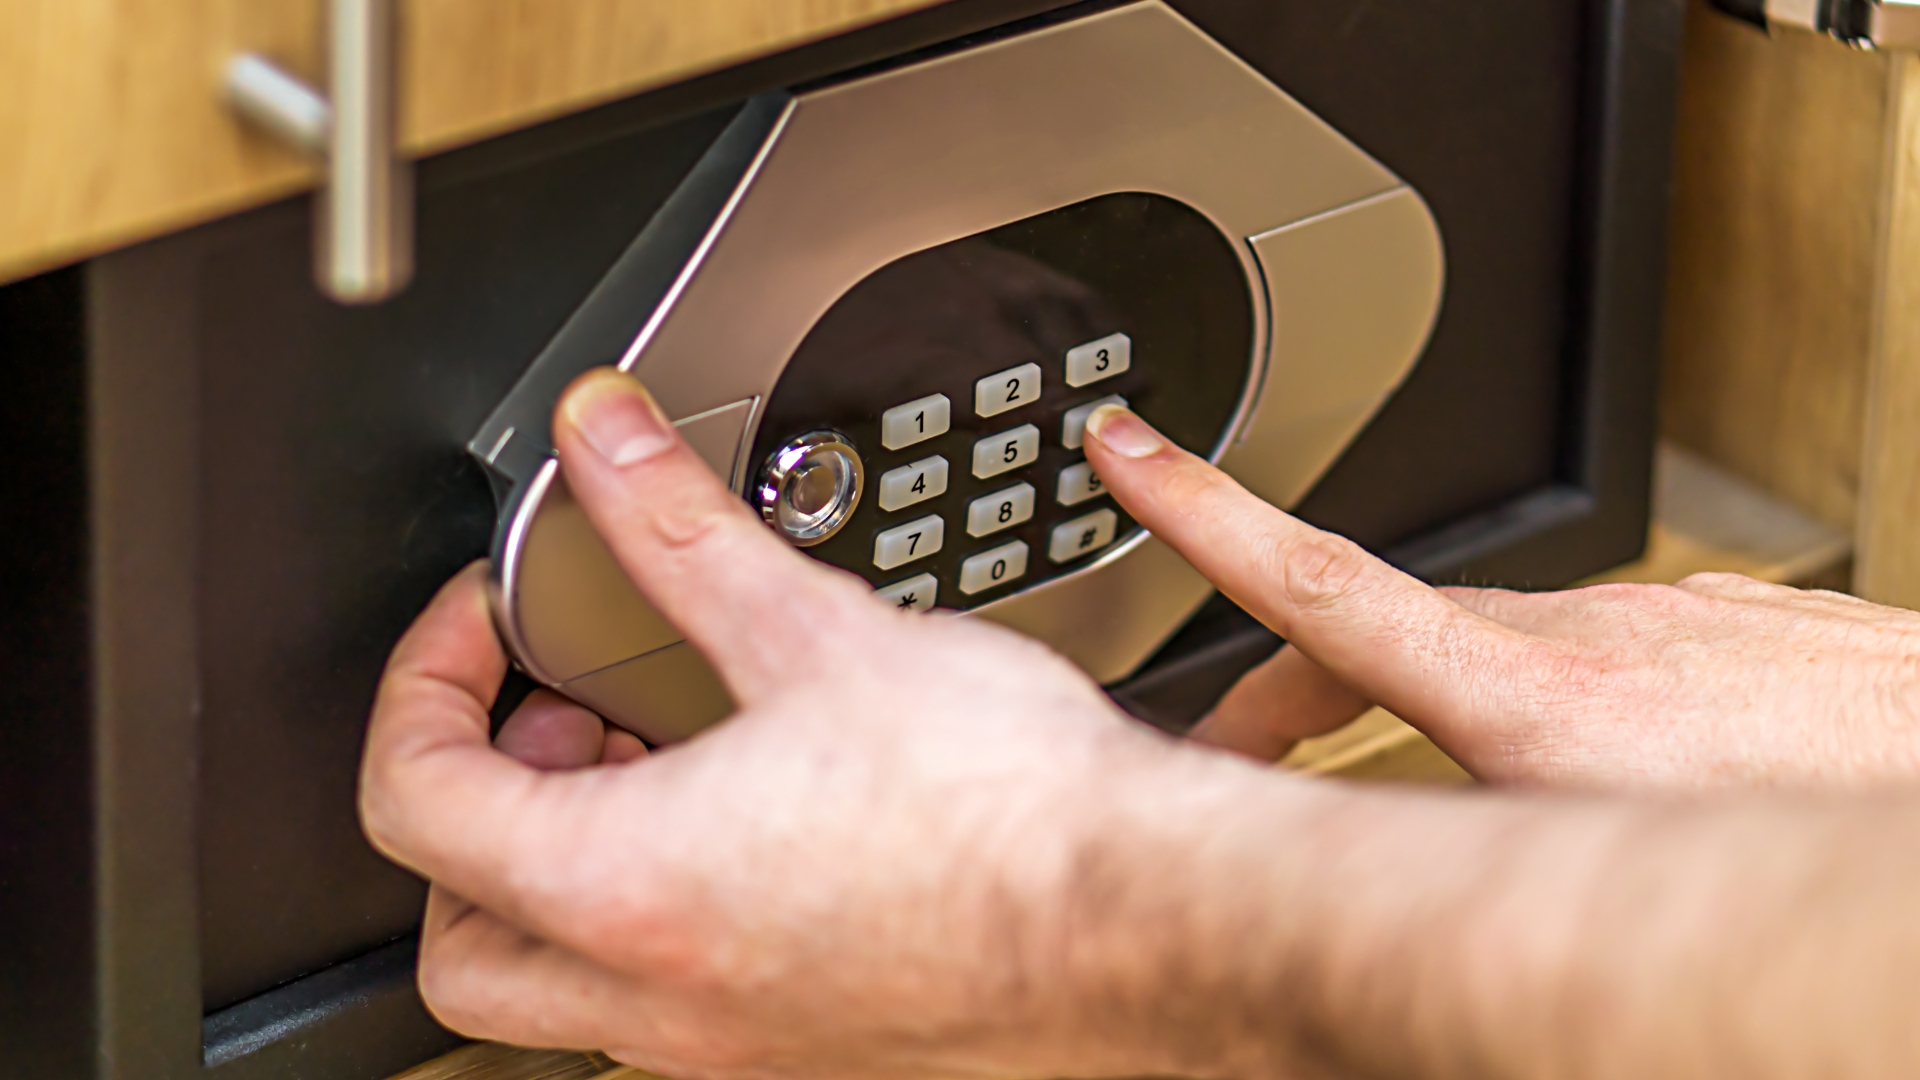 A man accessing an electronic safe in a cabinet